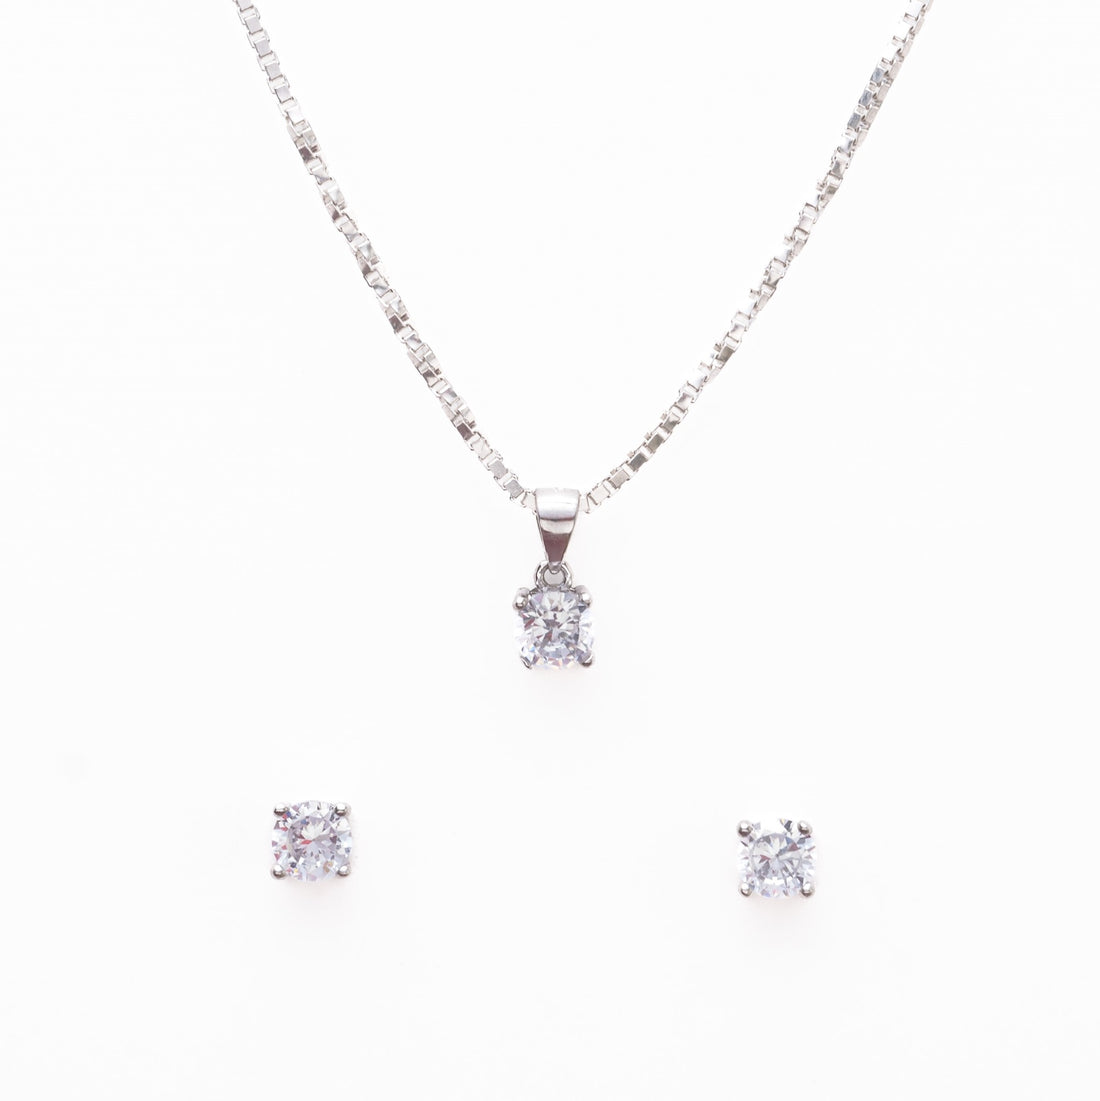 Real Silver Set Chain Pendant and Earrings with Finely Cut Stones for Women